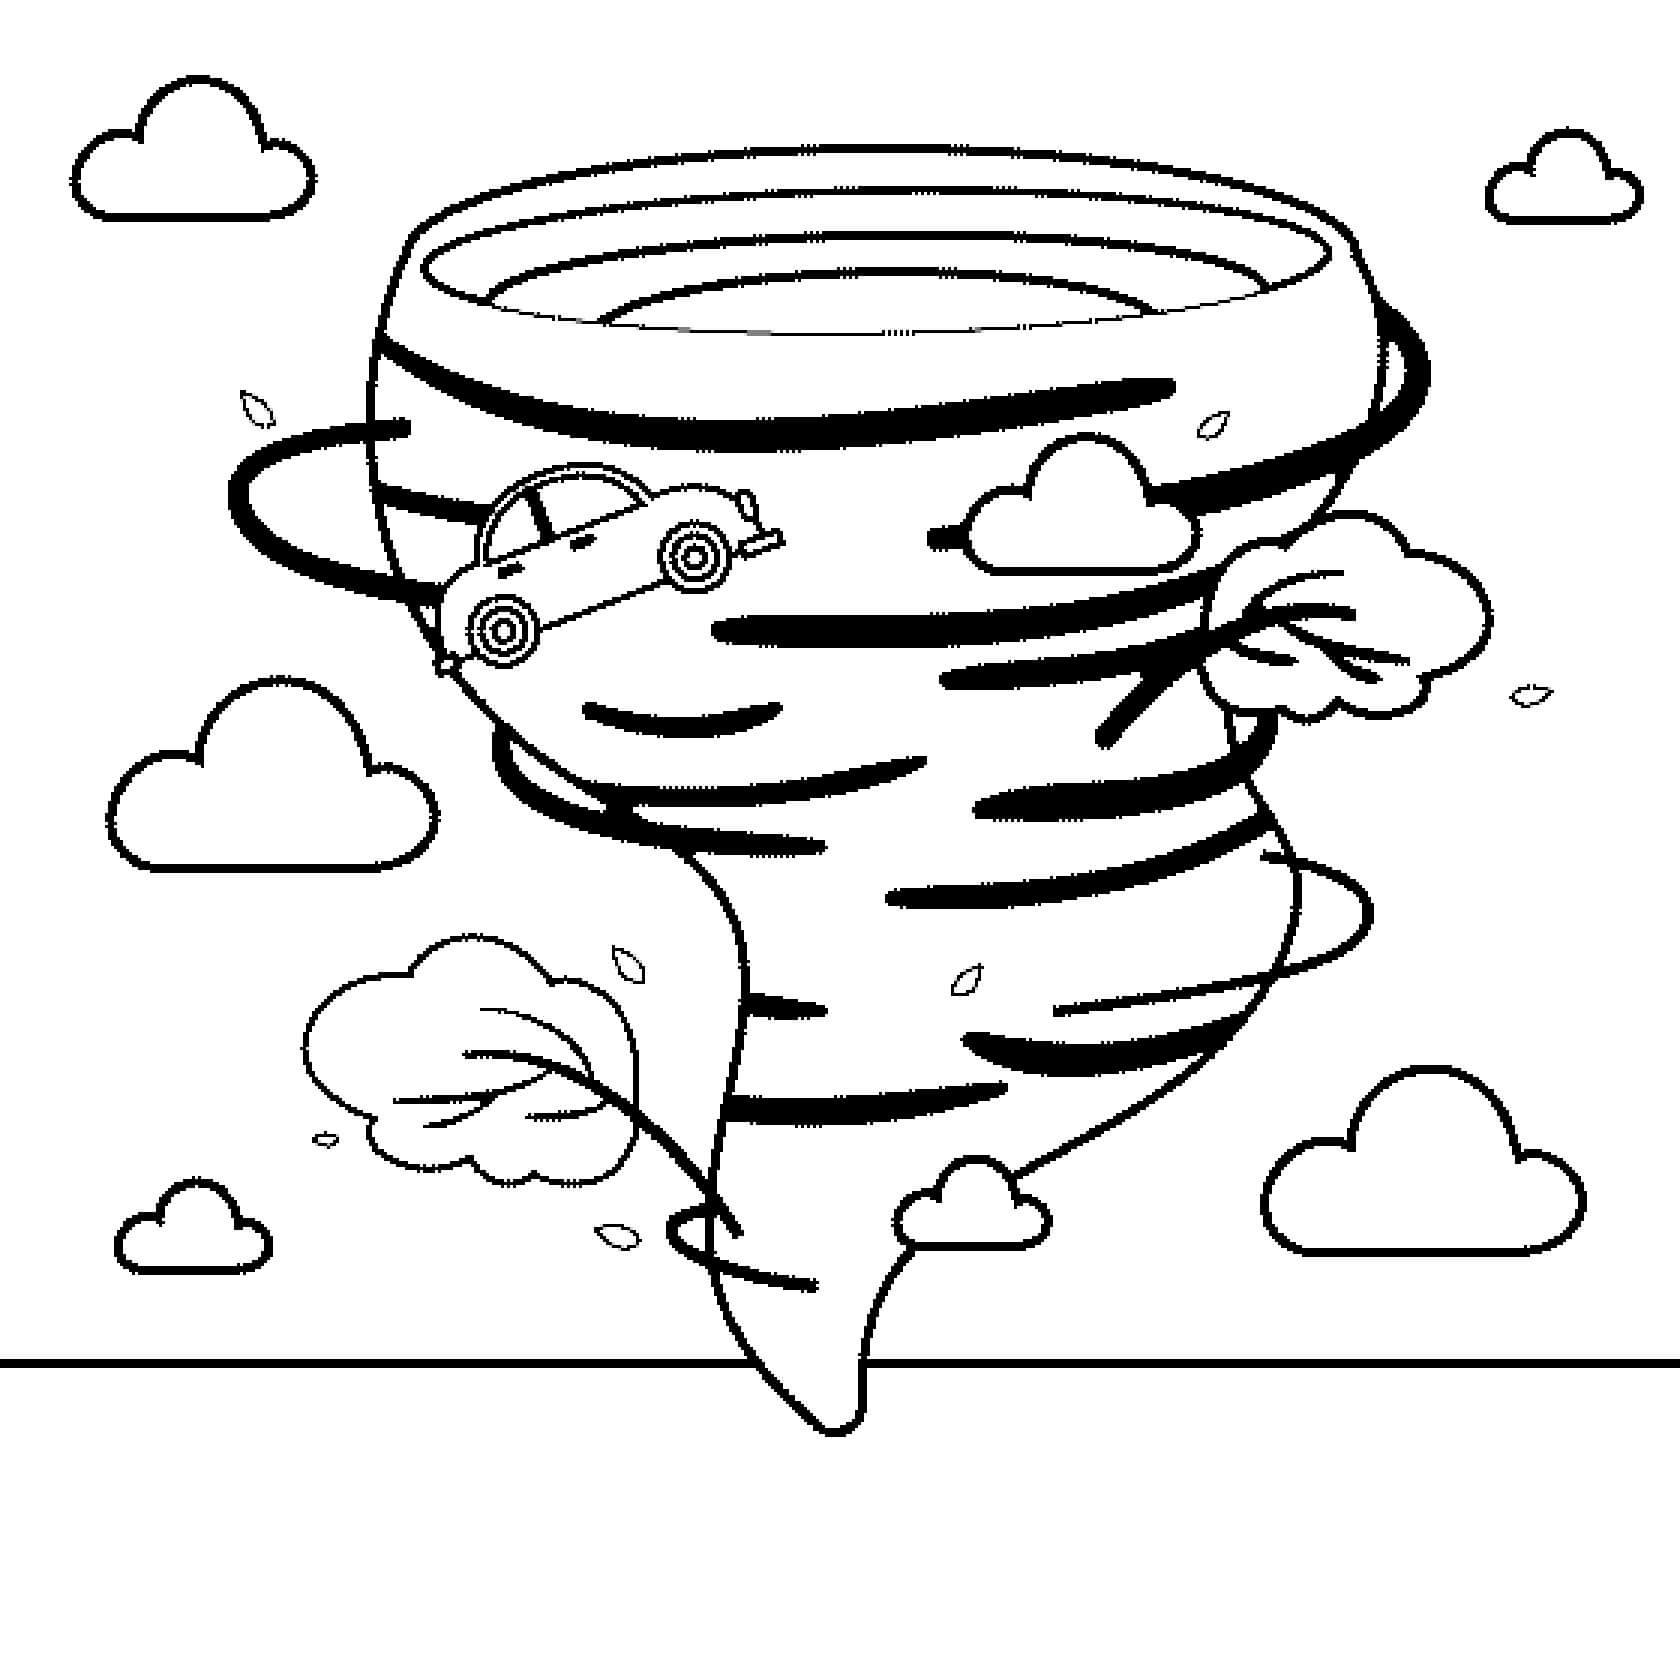 Tornade 2 coloring page